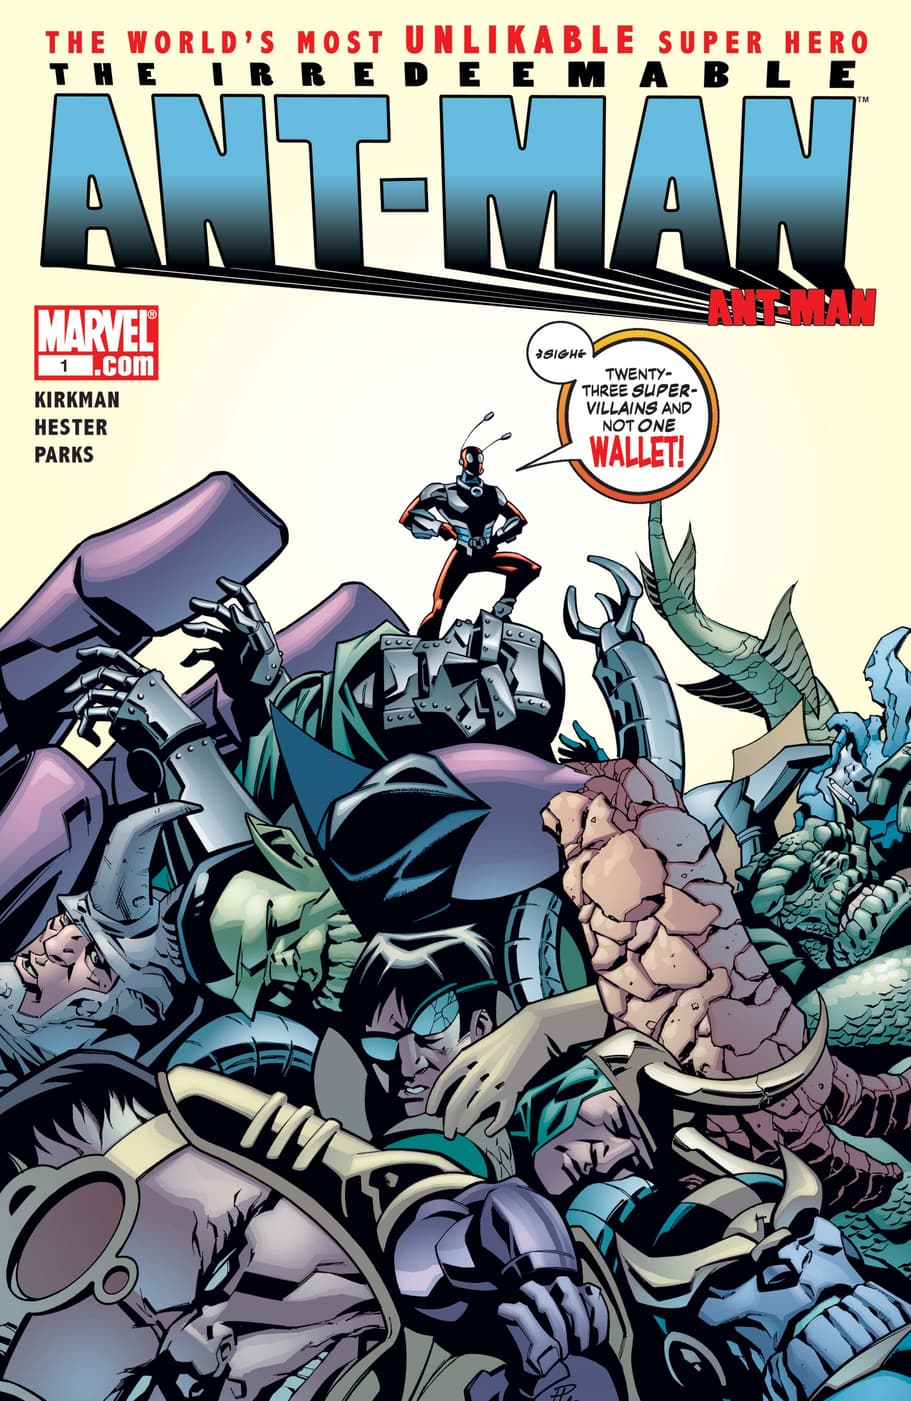  Irredeemable Ant-Man (2006) #1